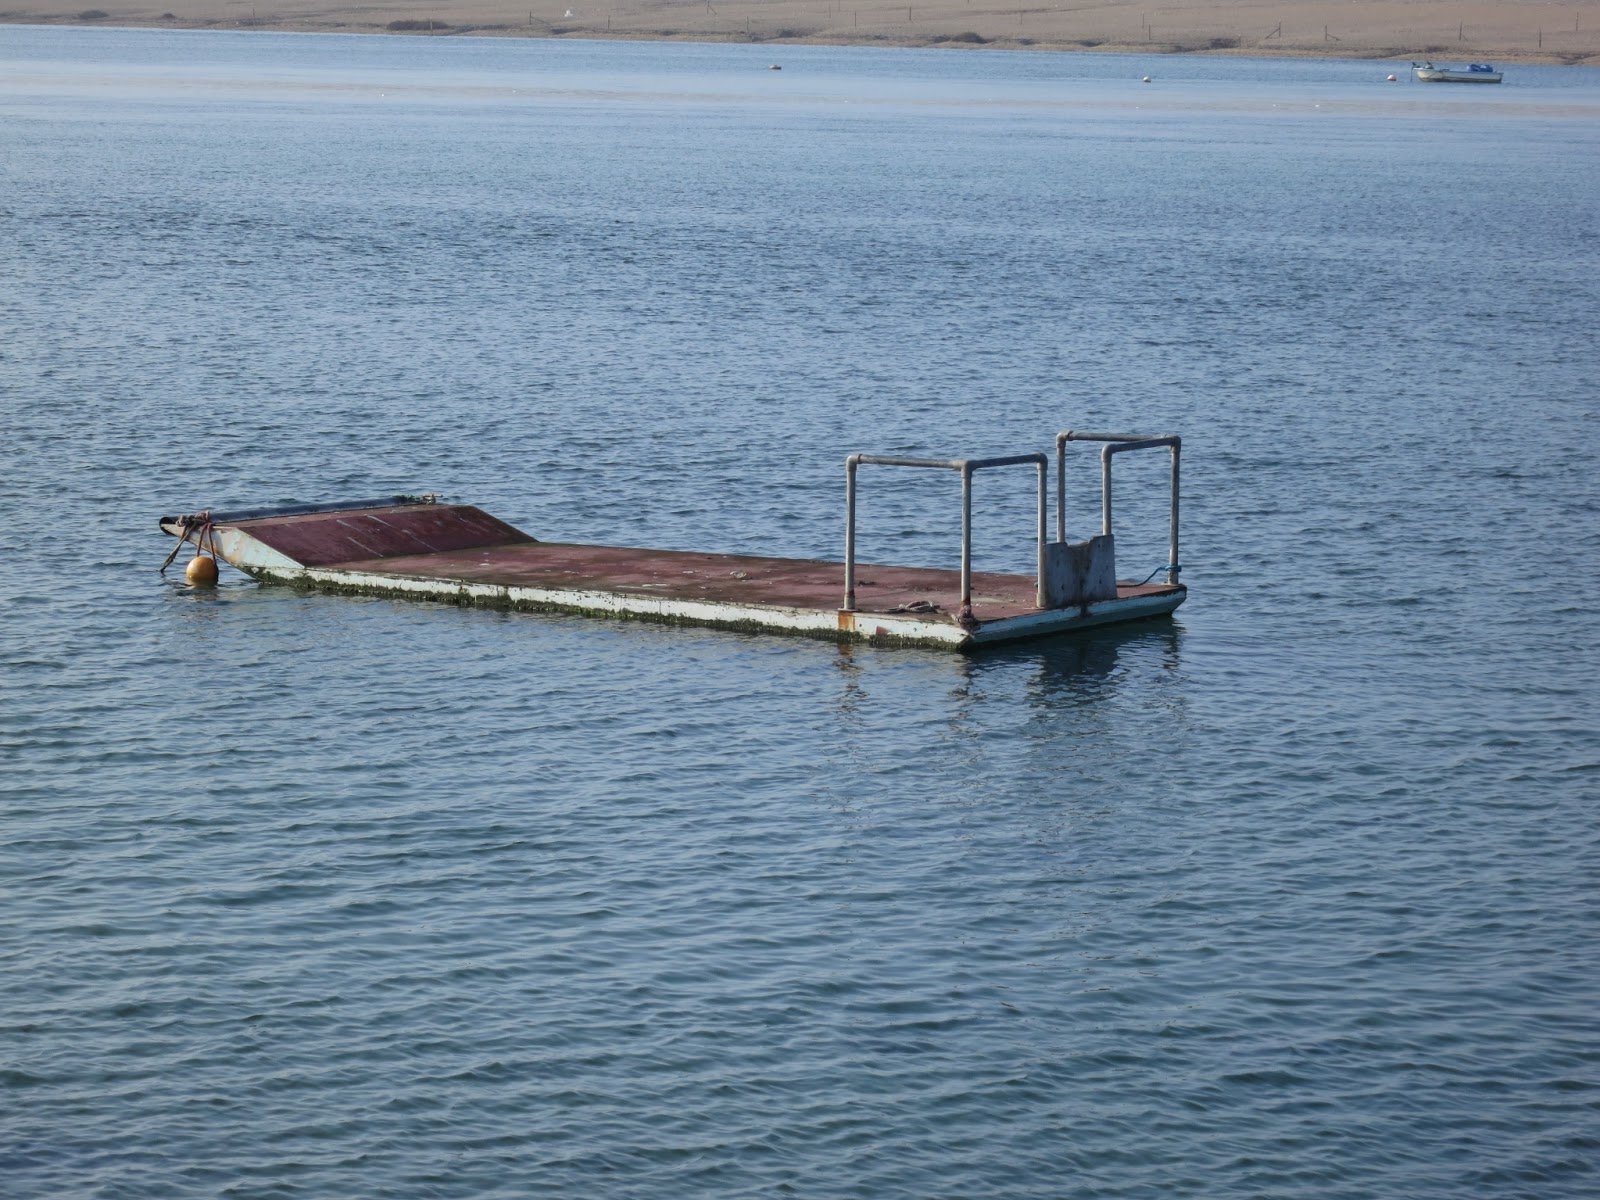 Platform with railing on Fleet Lagoon in Dorset. Blue water with ripples.